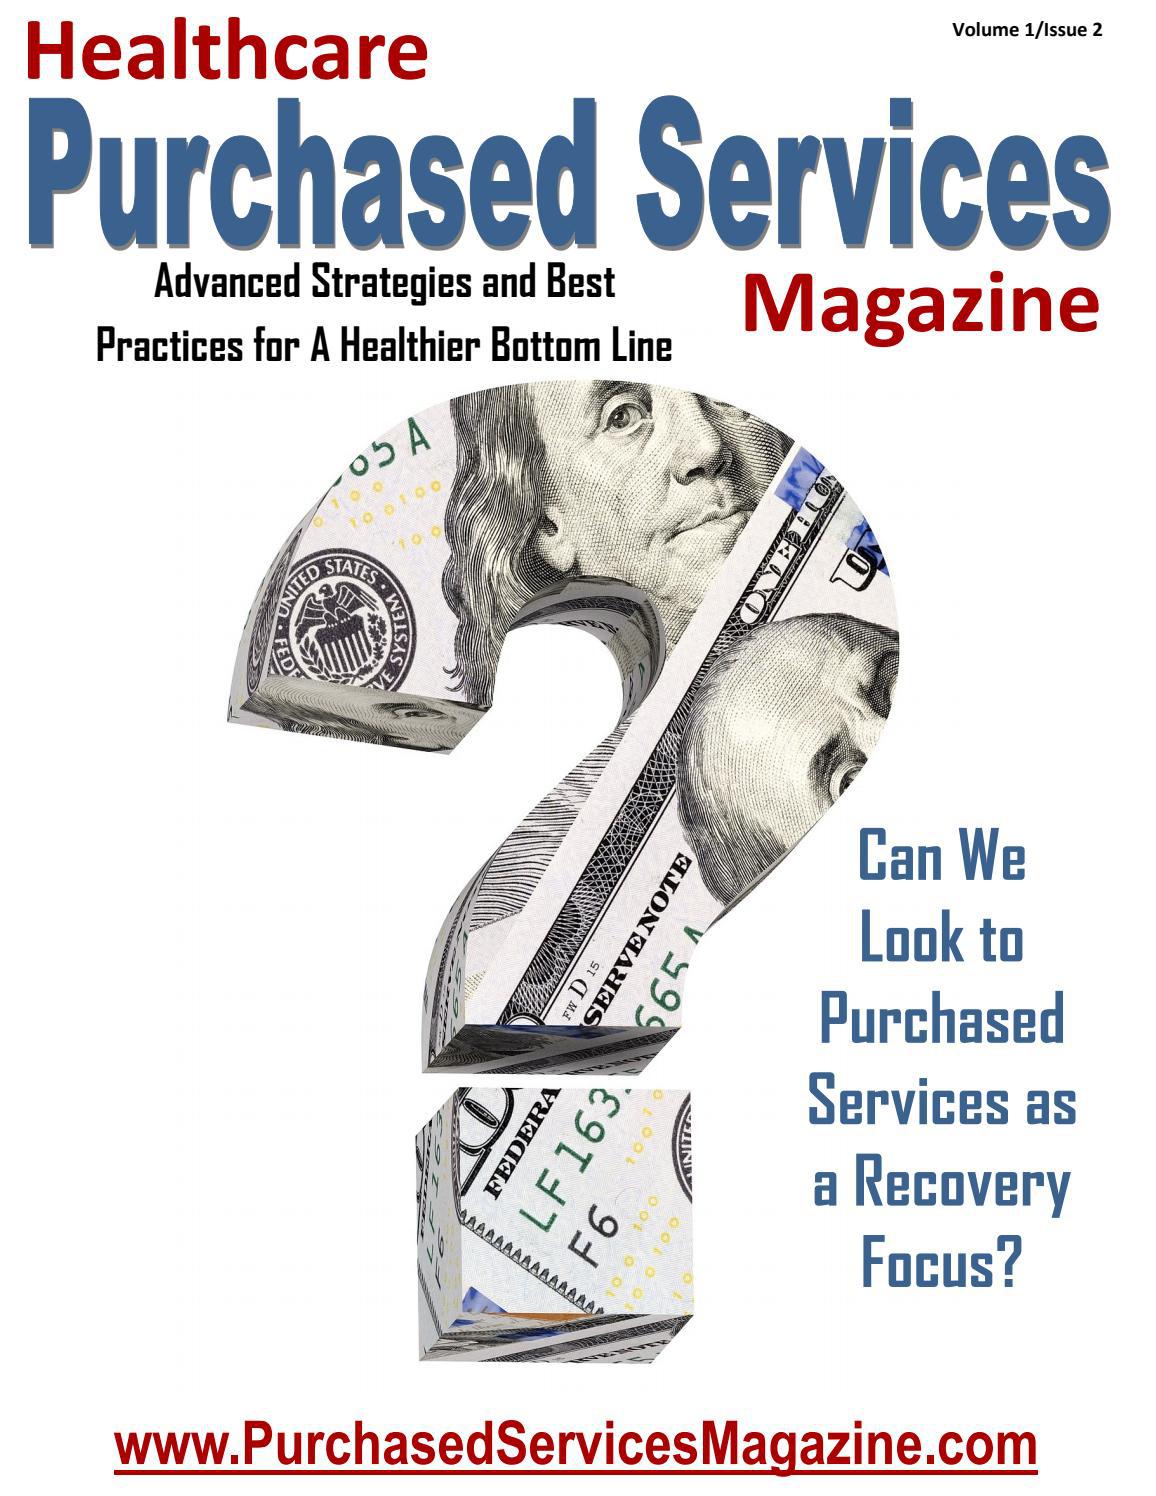 Healthcare Purchased Services Magazine Volume 1 - Issue 2